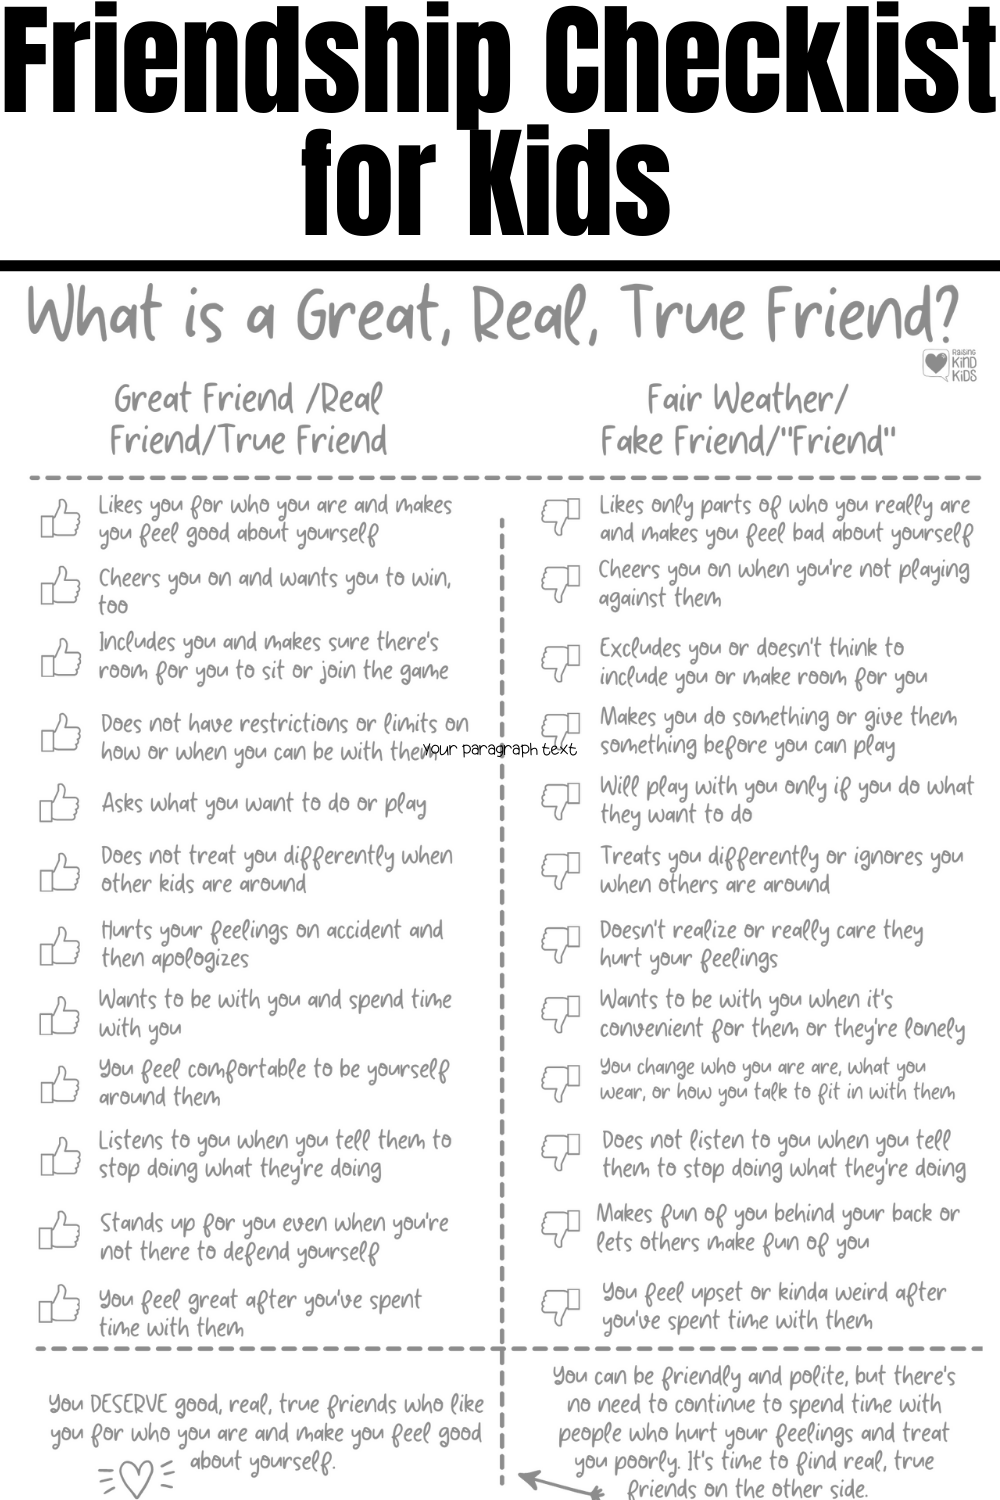 Help your kids decide for themselves who their good, real, true friends are with this friendship checklist to help them deal with friendship issues.